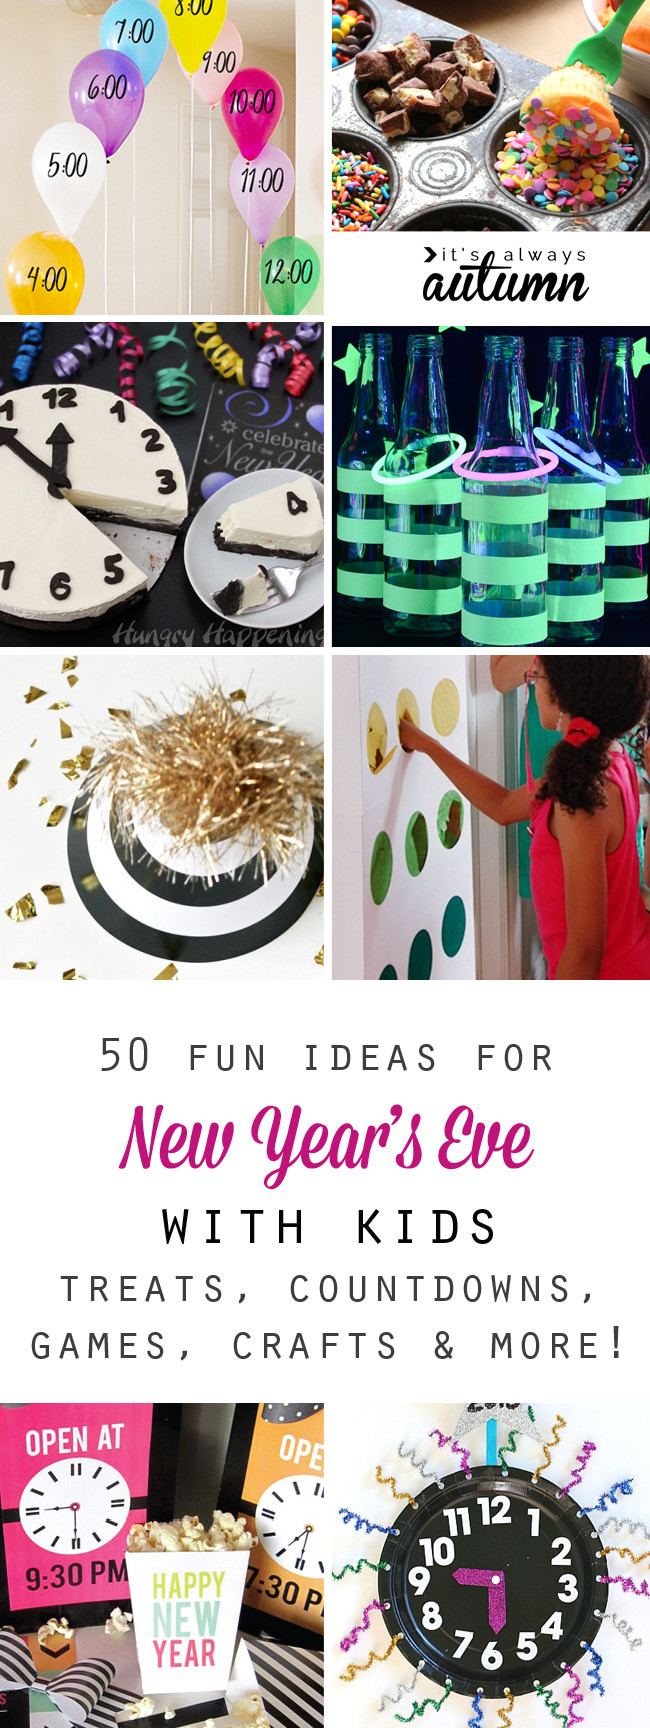 New Year Eve Party Games For Kids
 50 best ideas for celebrating New Year’s Eve with kids